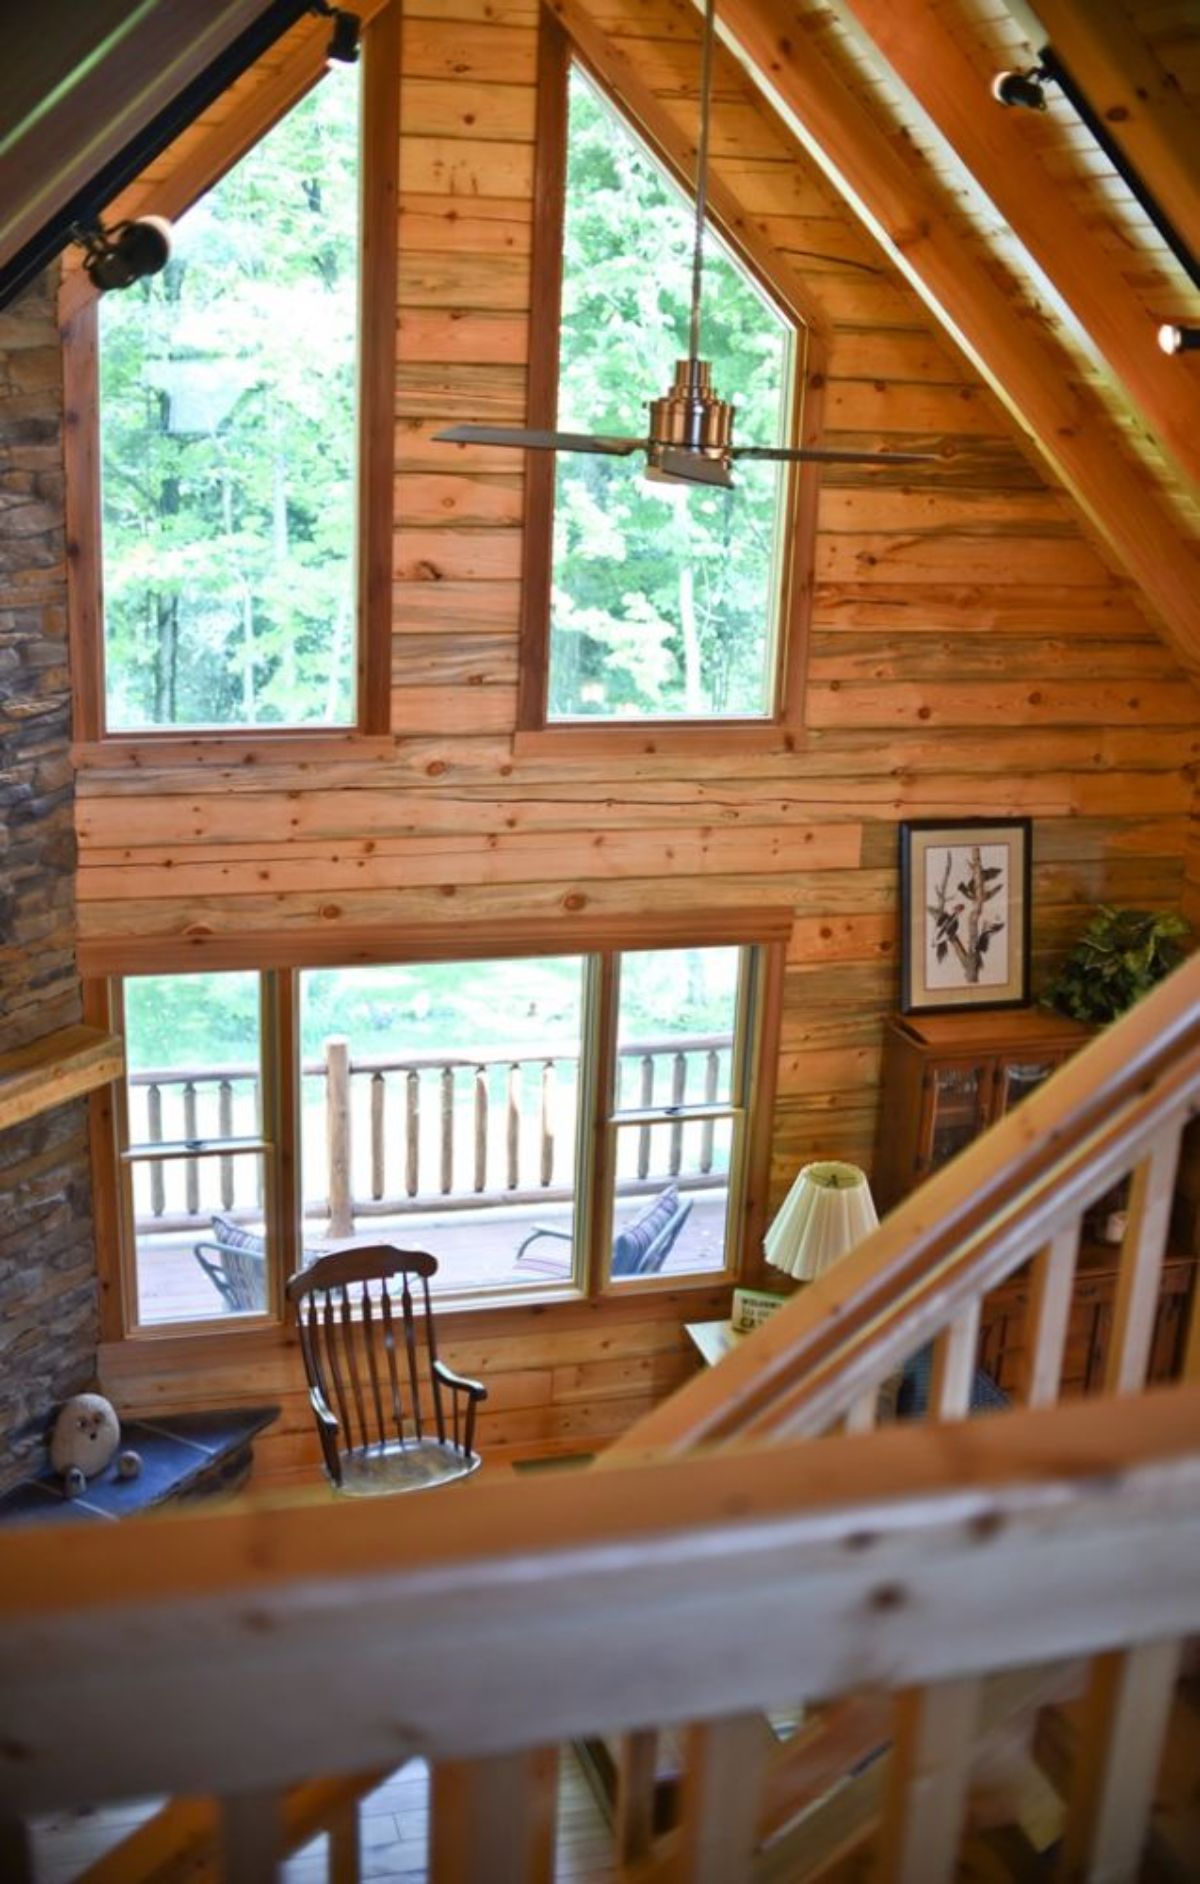 view looking down into great room of log cabin